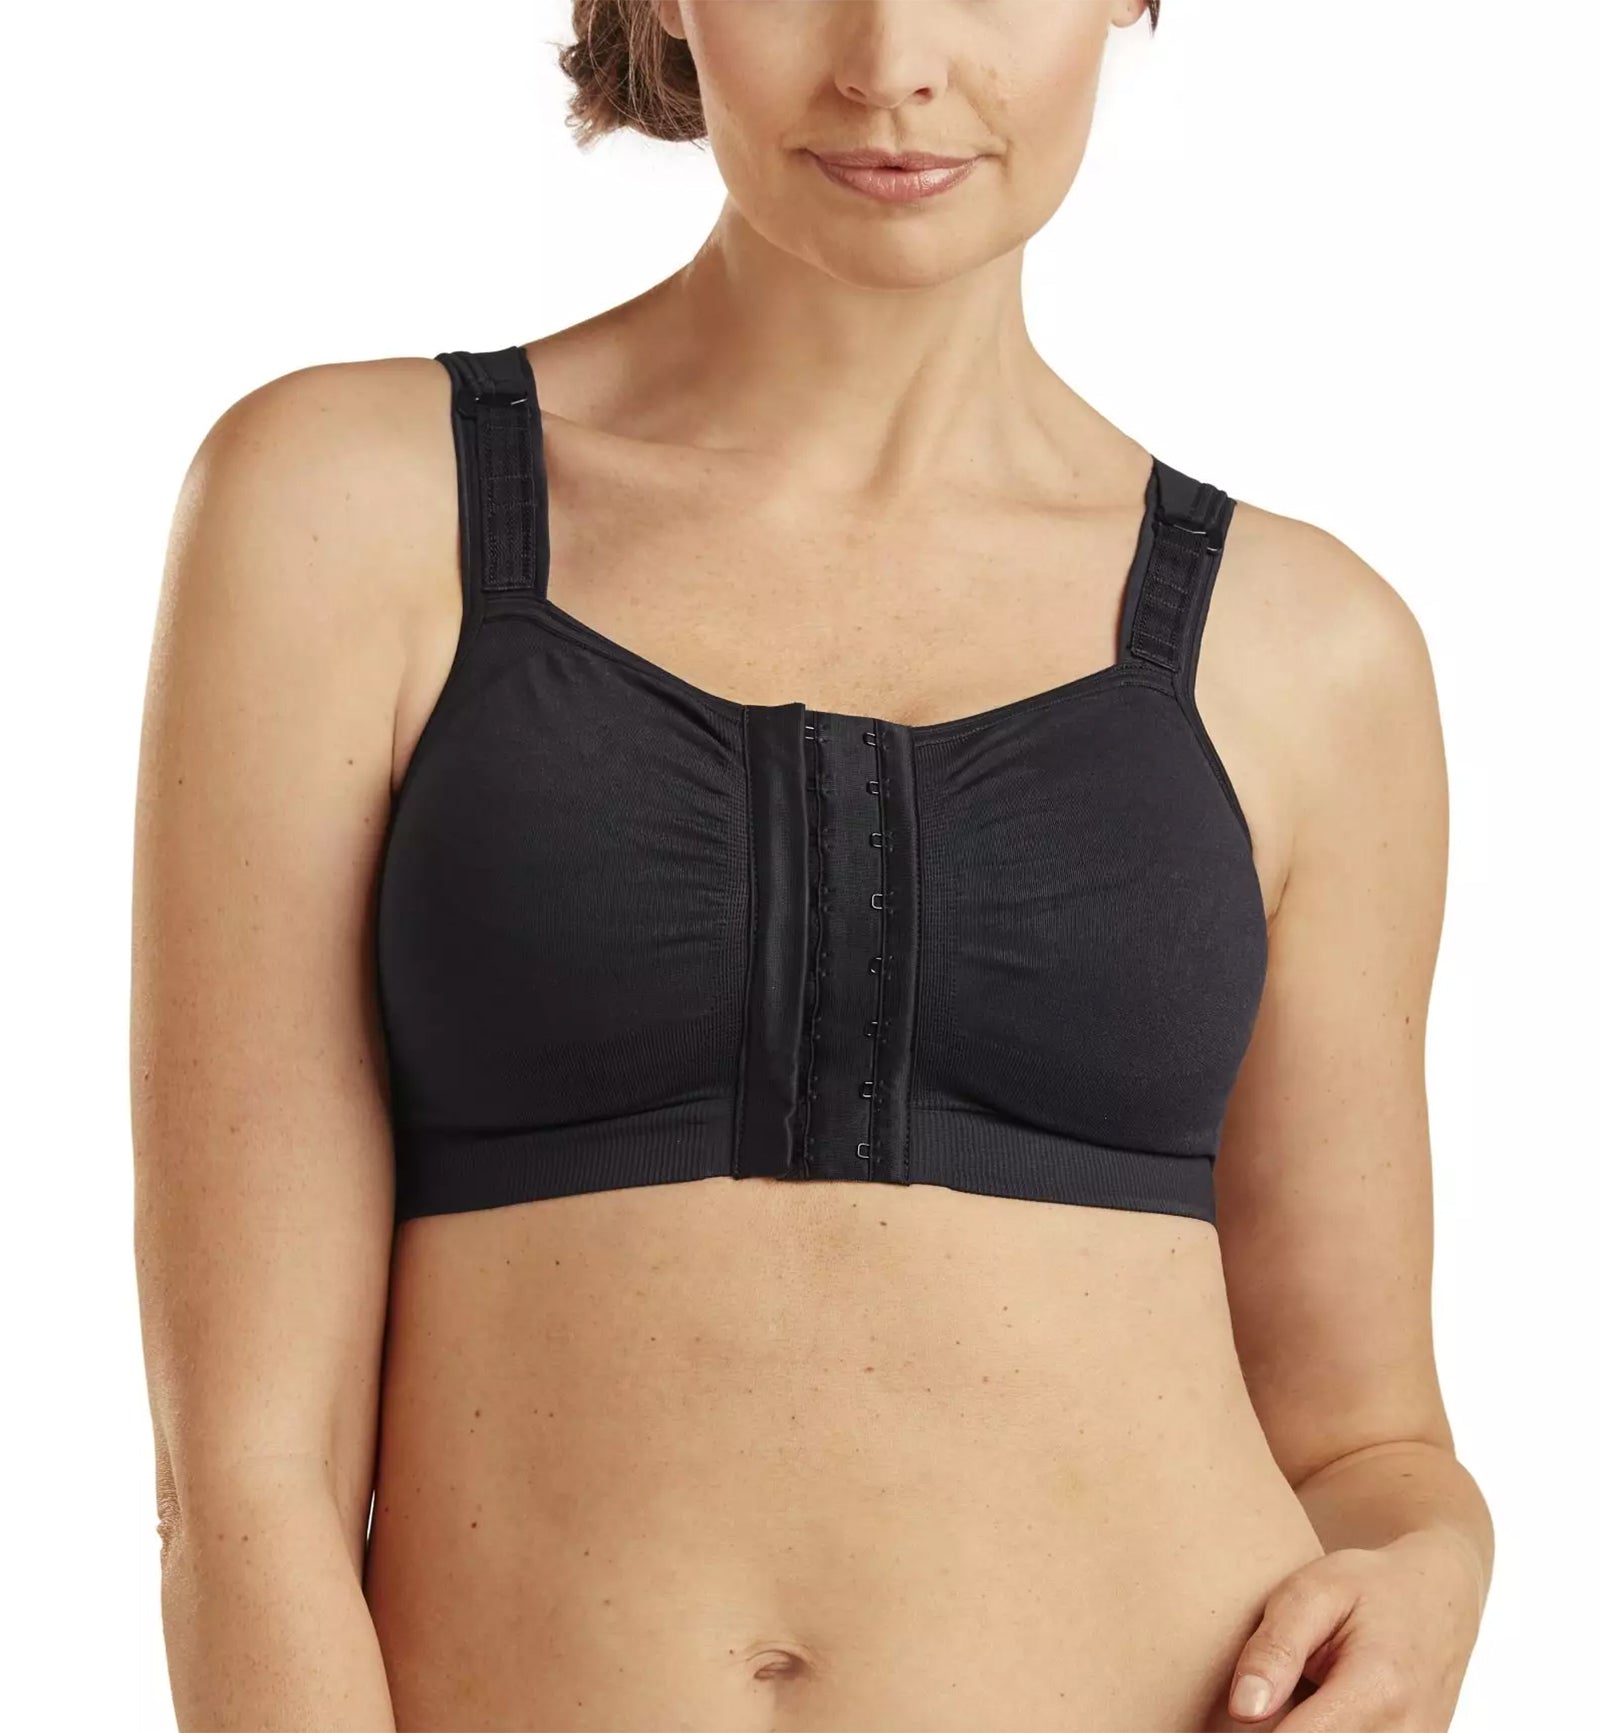 Carefix Mary Front Close Post-Op Bra (3343)- White - Breakout Bras